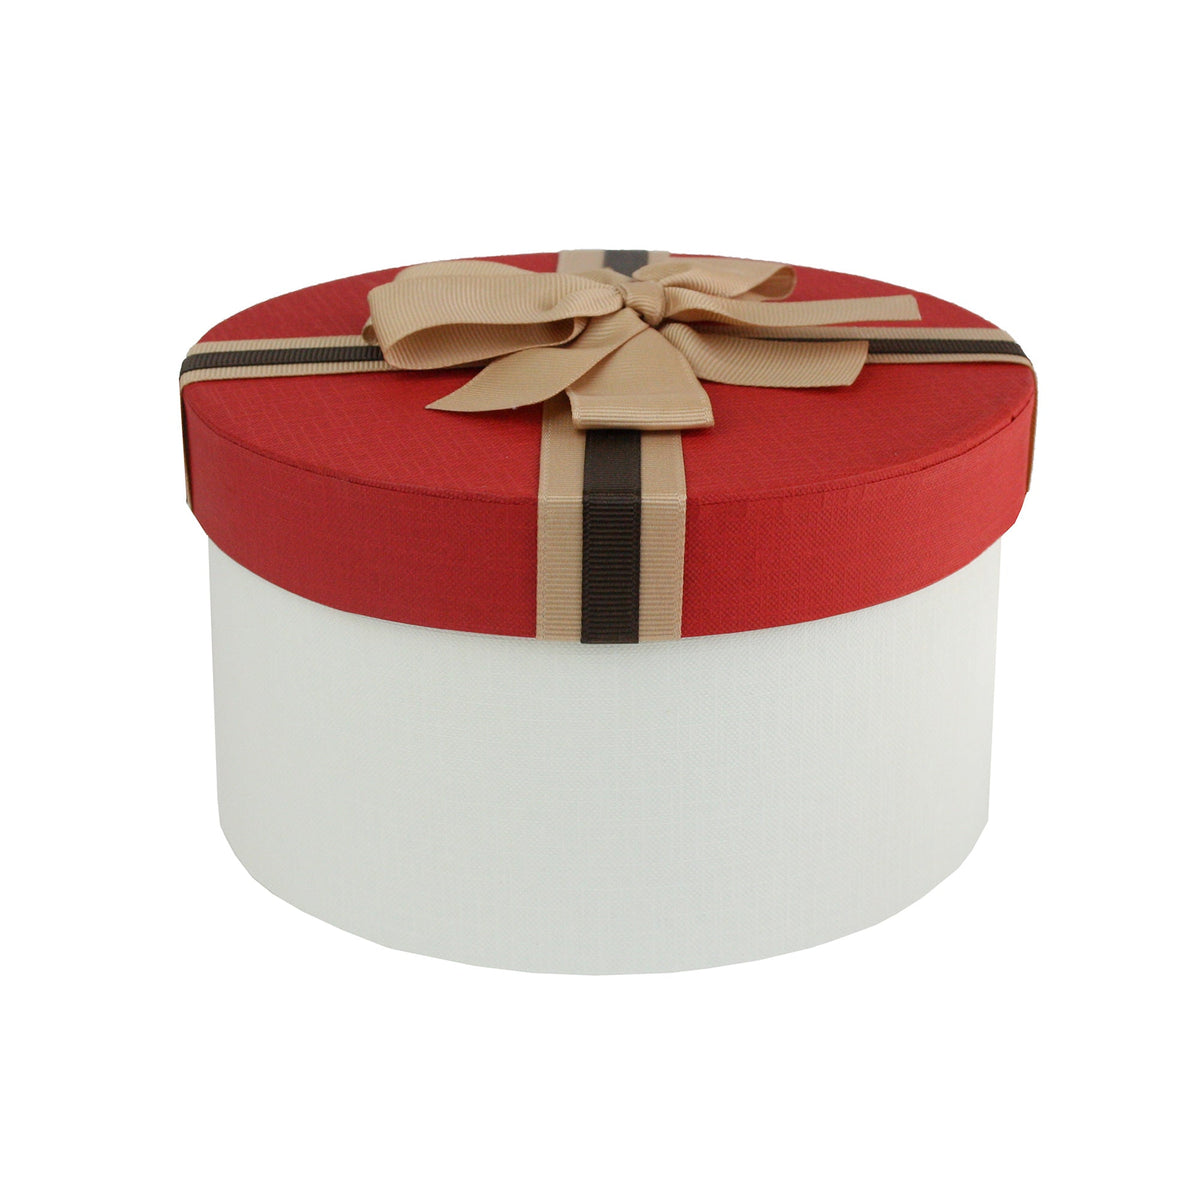 Single Cream/Red Gift Boxes With Brown Satin Ribbon (Sizes Available)